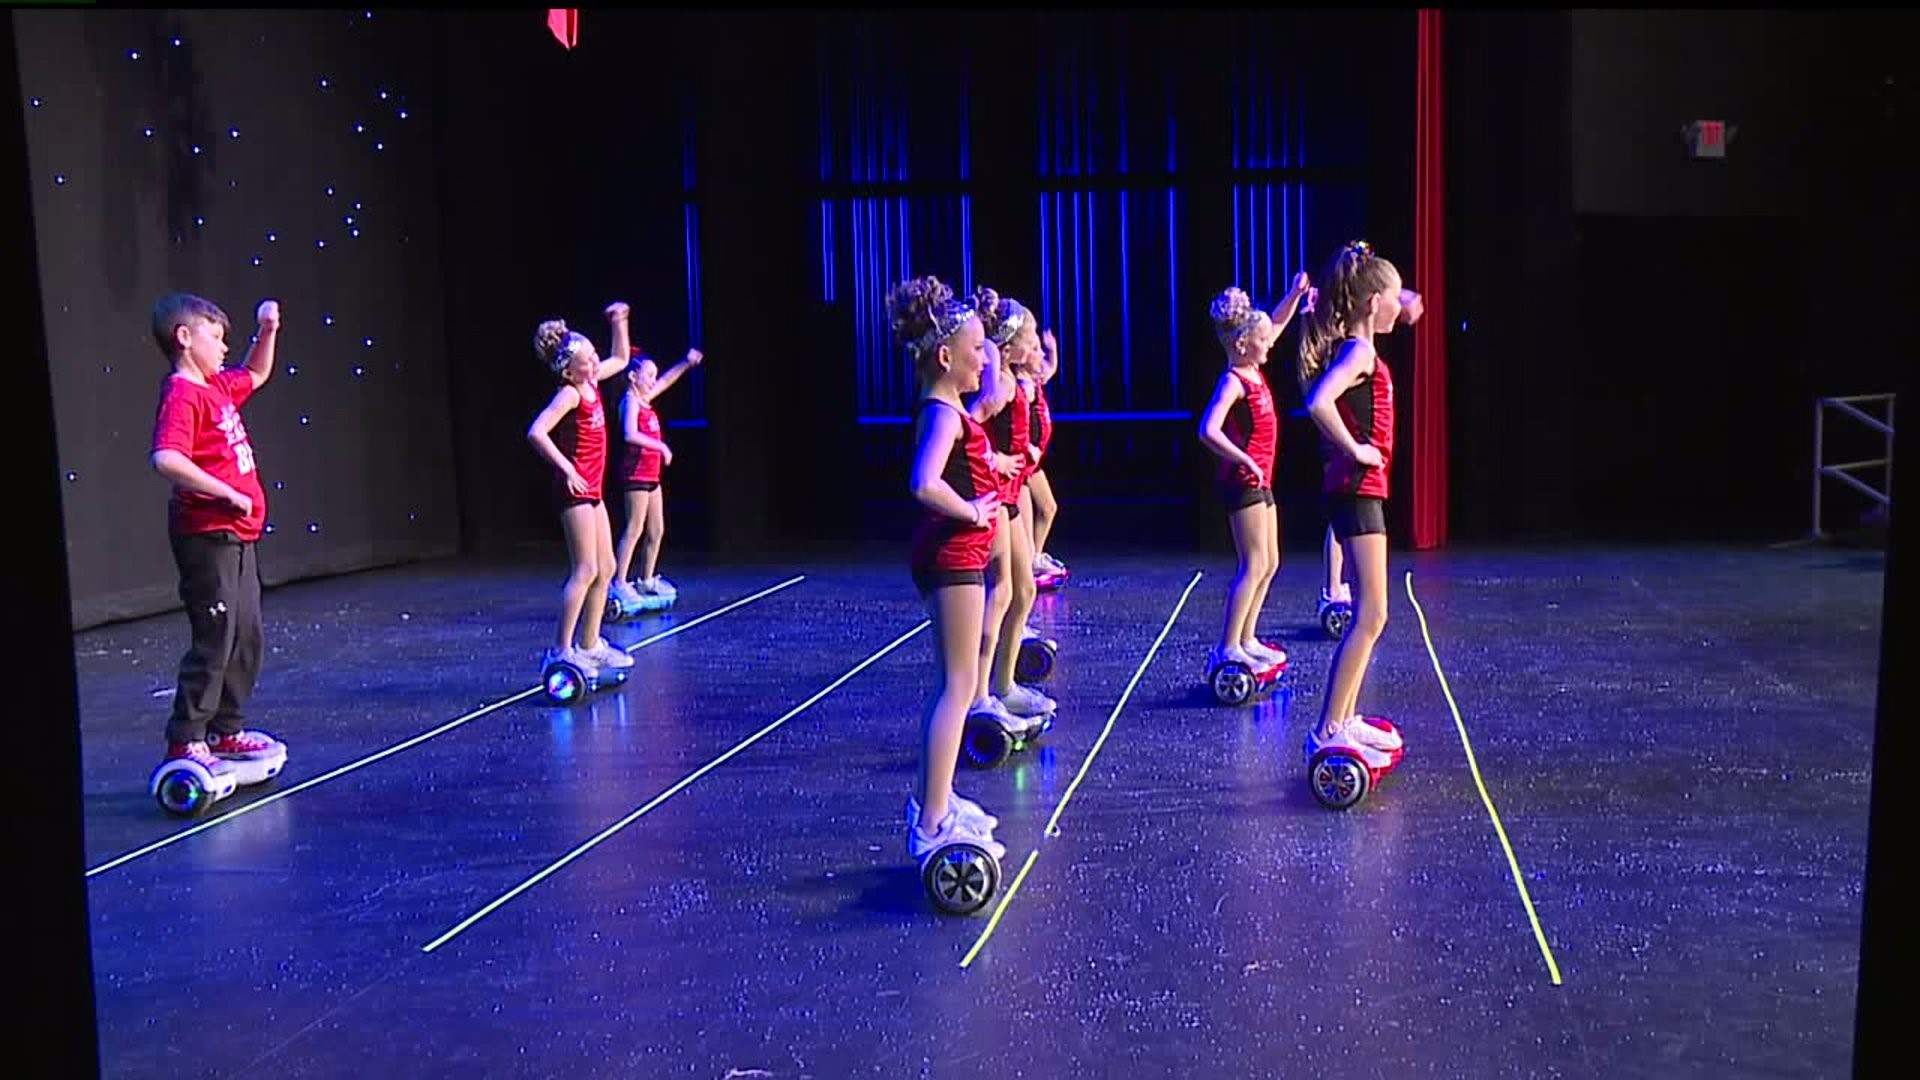 Tina`s Dance Studio`s Holiday Spectacular takes the stage to make wishes come true